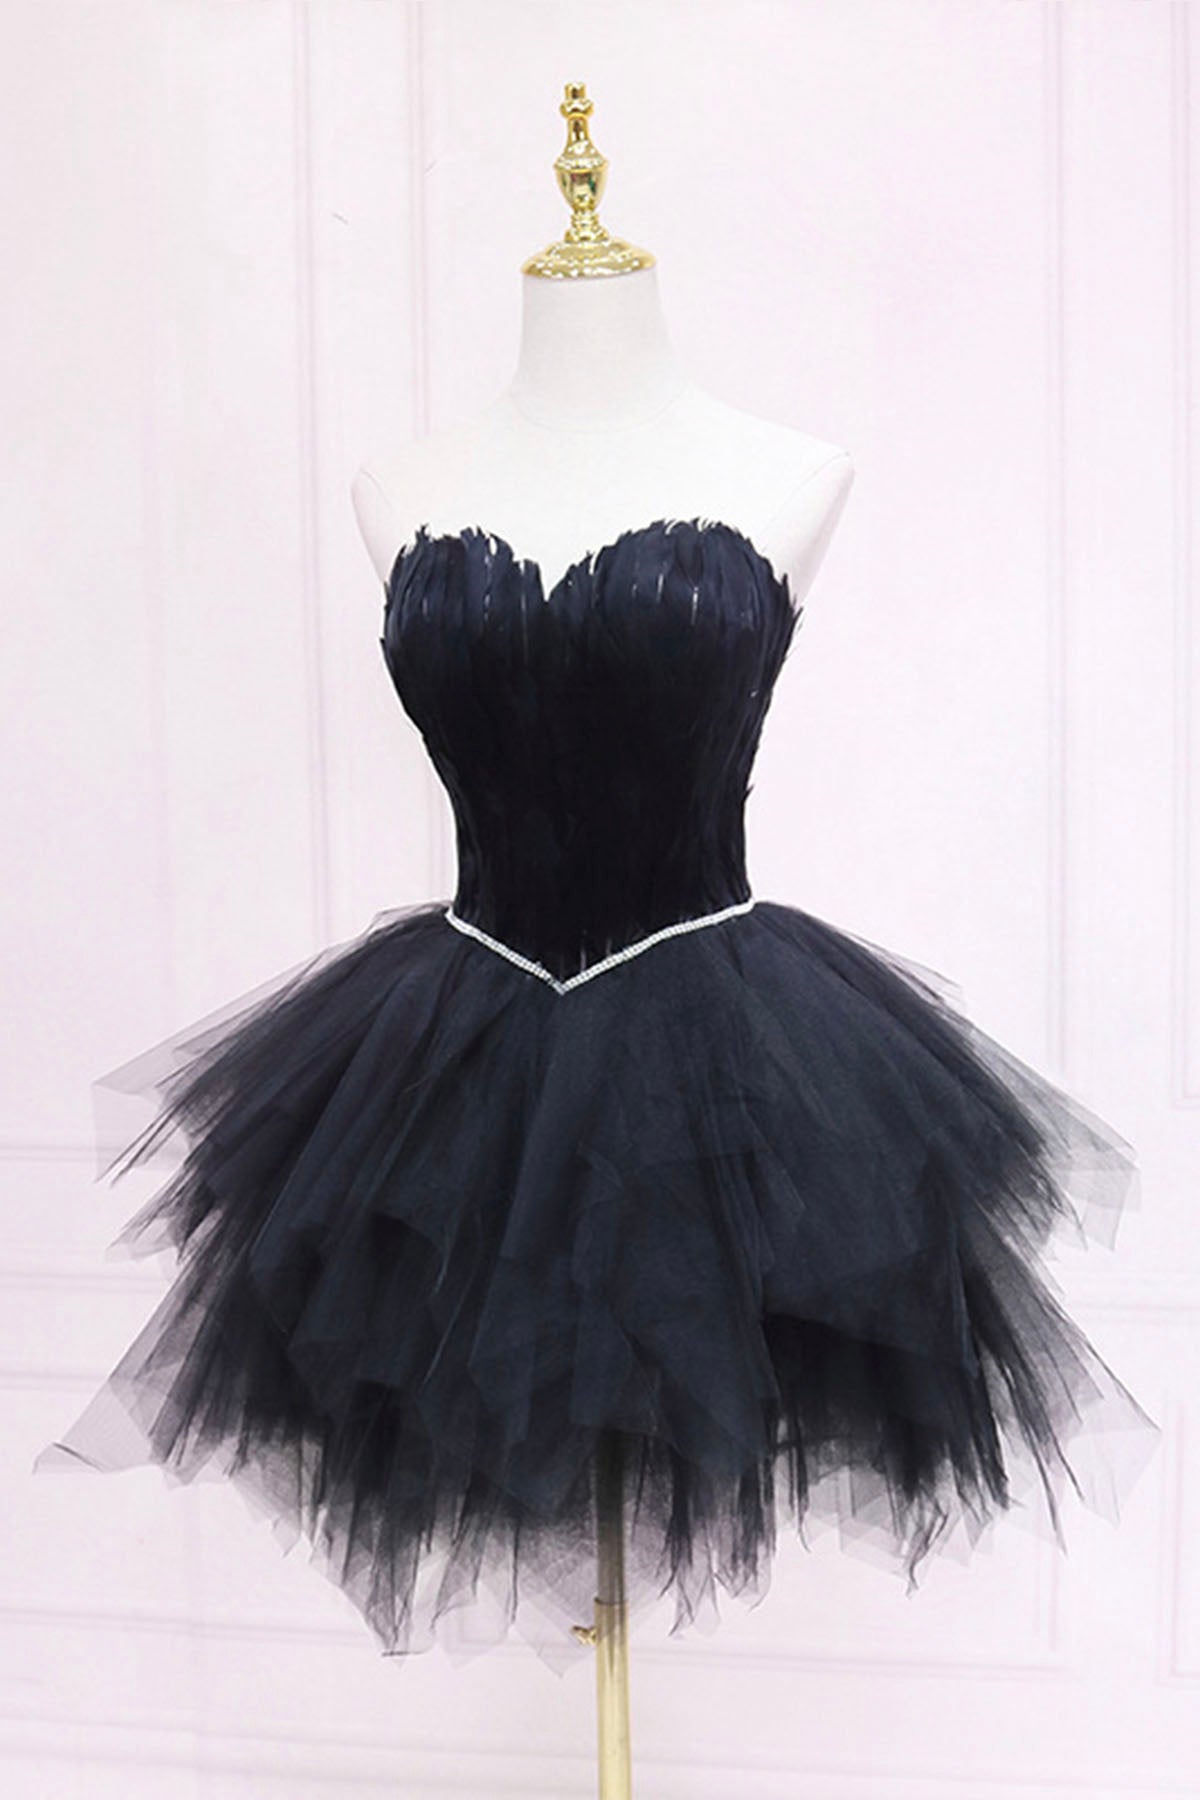 Dressy Outfit, Black Tulle Short Prom Dress with Feather, A-Line Sweetheart Neckline Party Dress